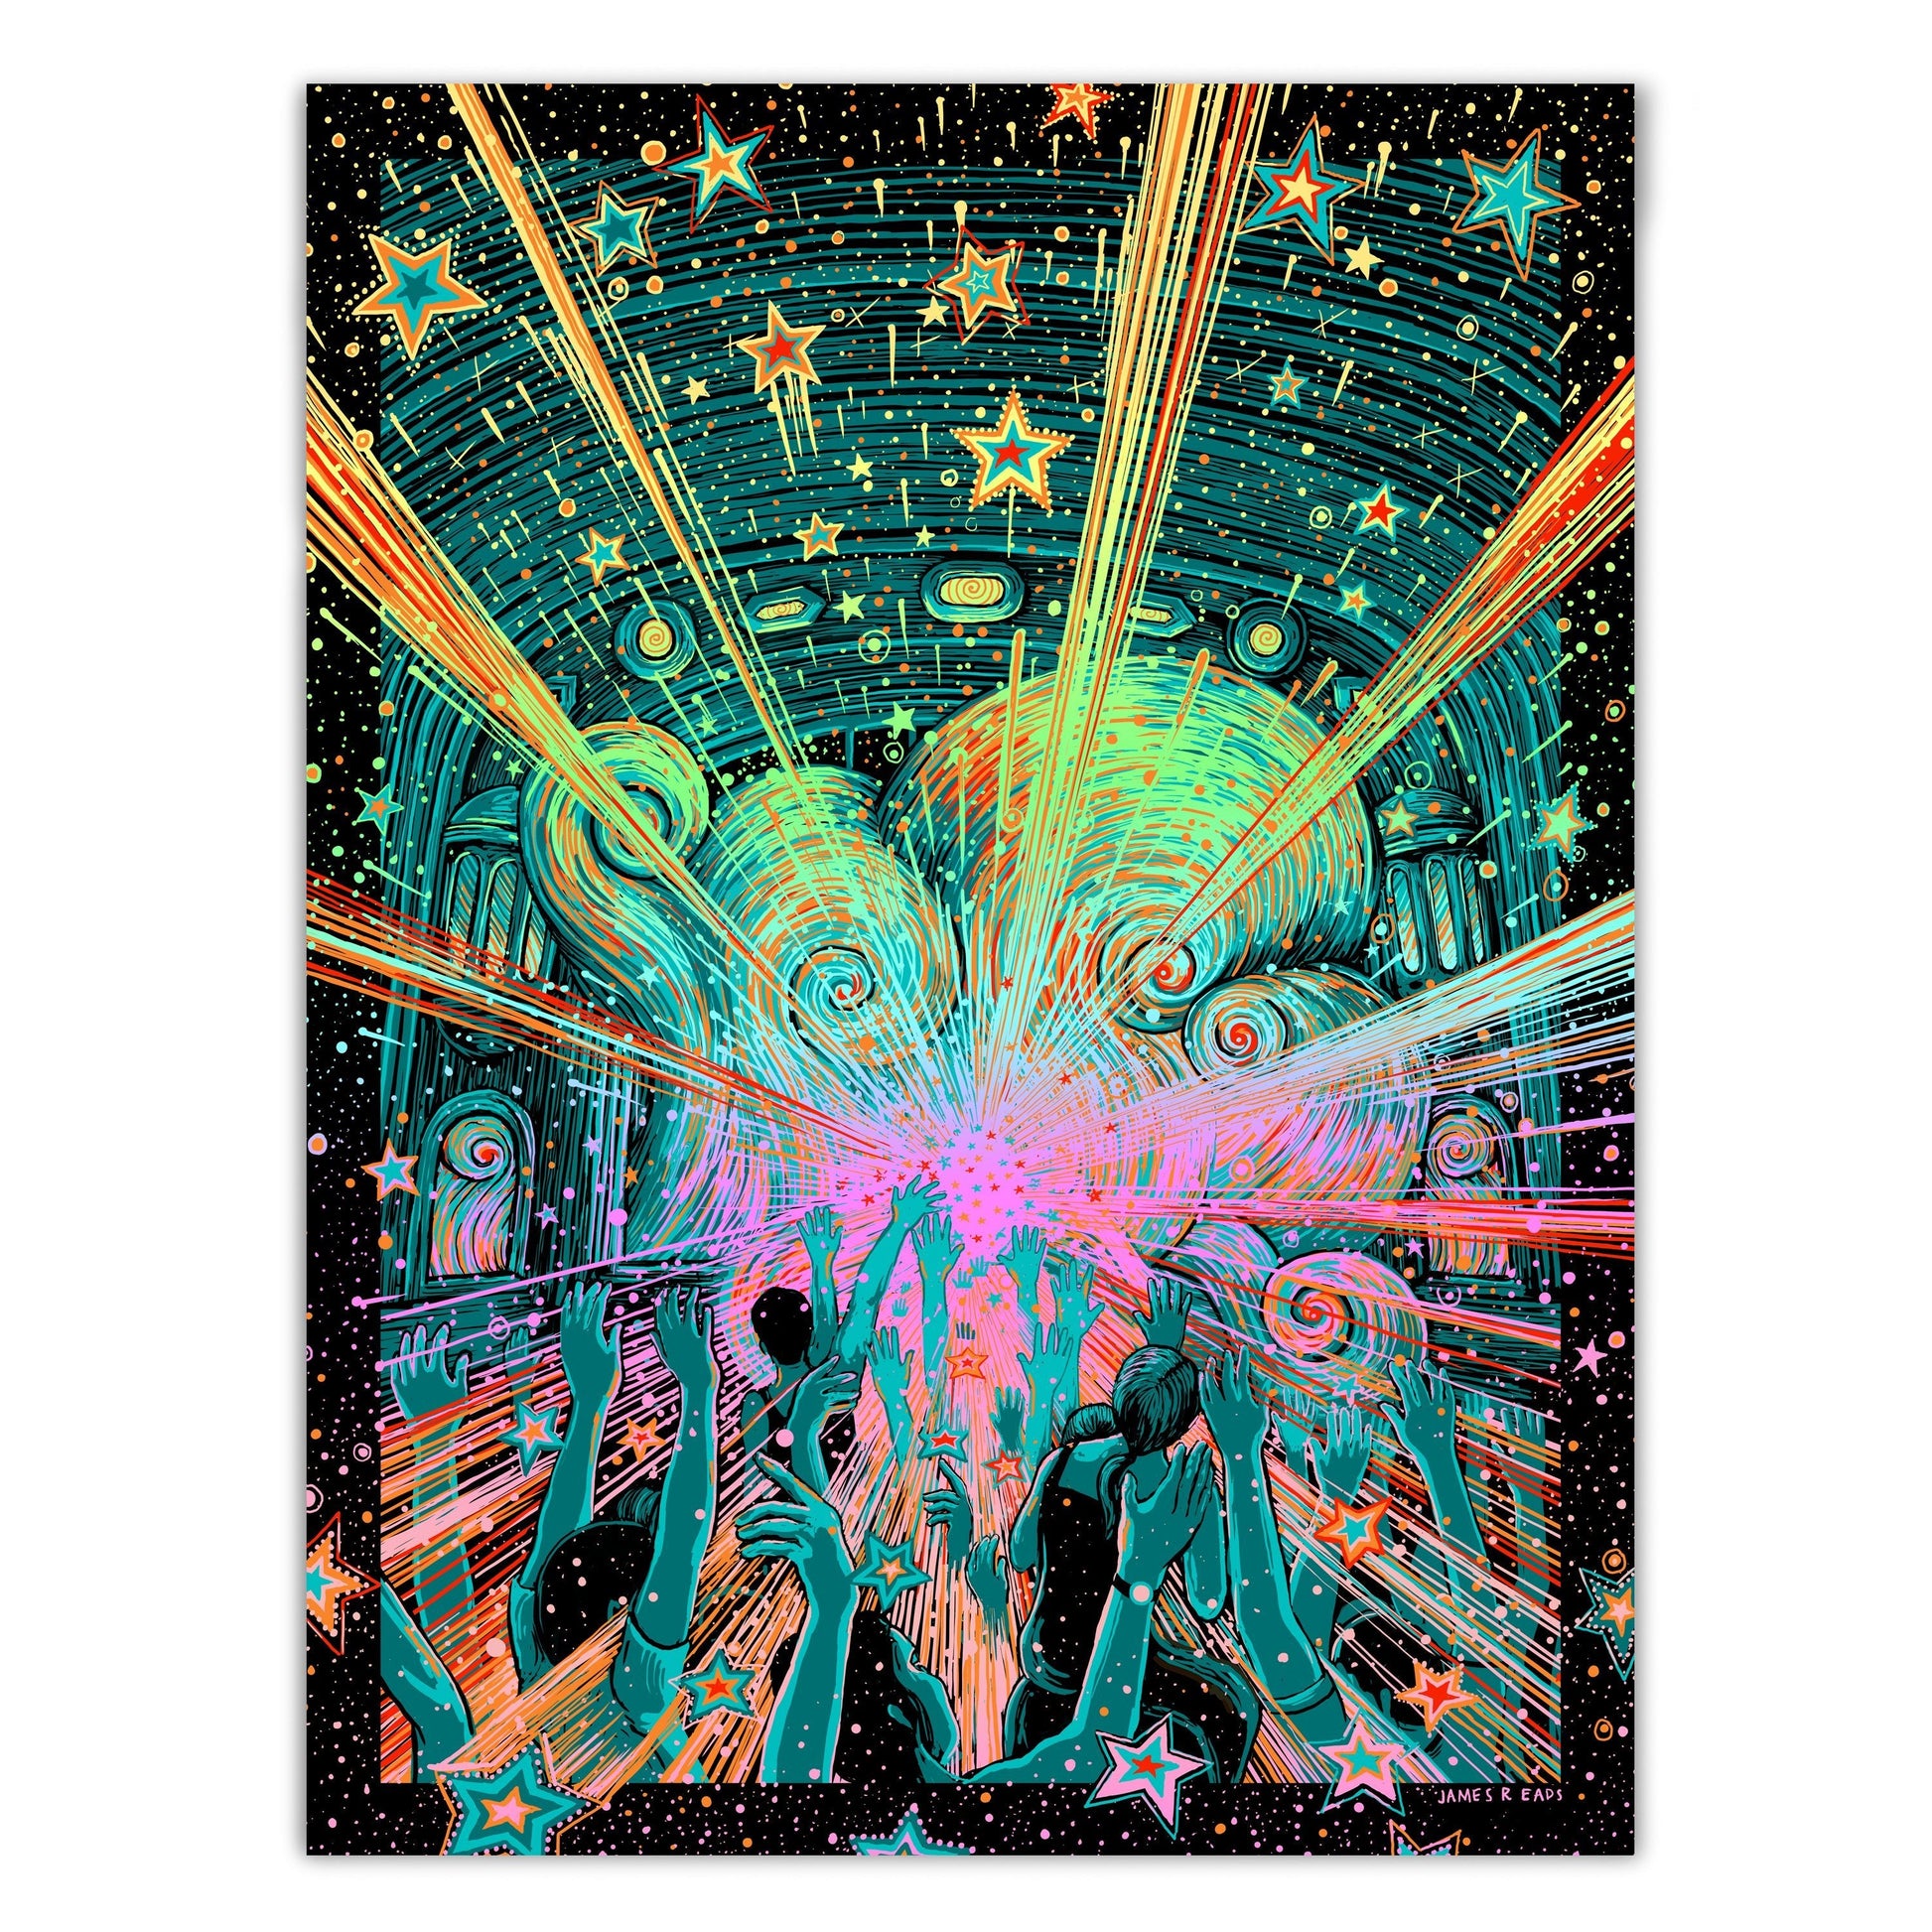 This is That Feeling (Limited Edition of 50) Print James R. Eads